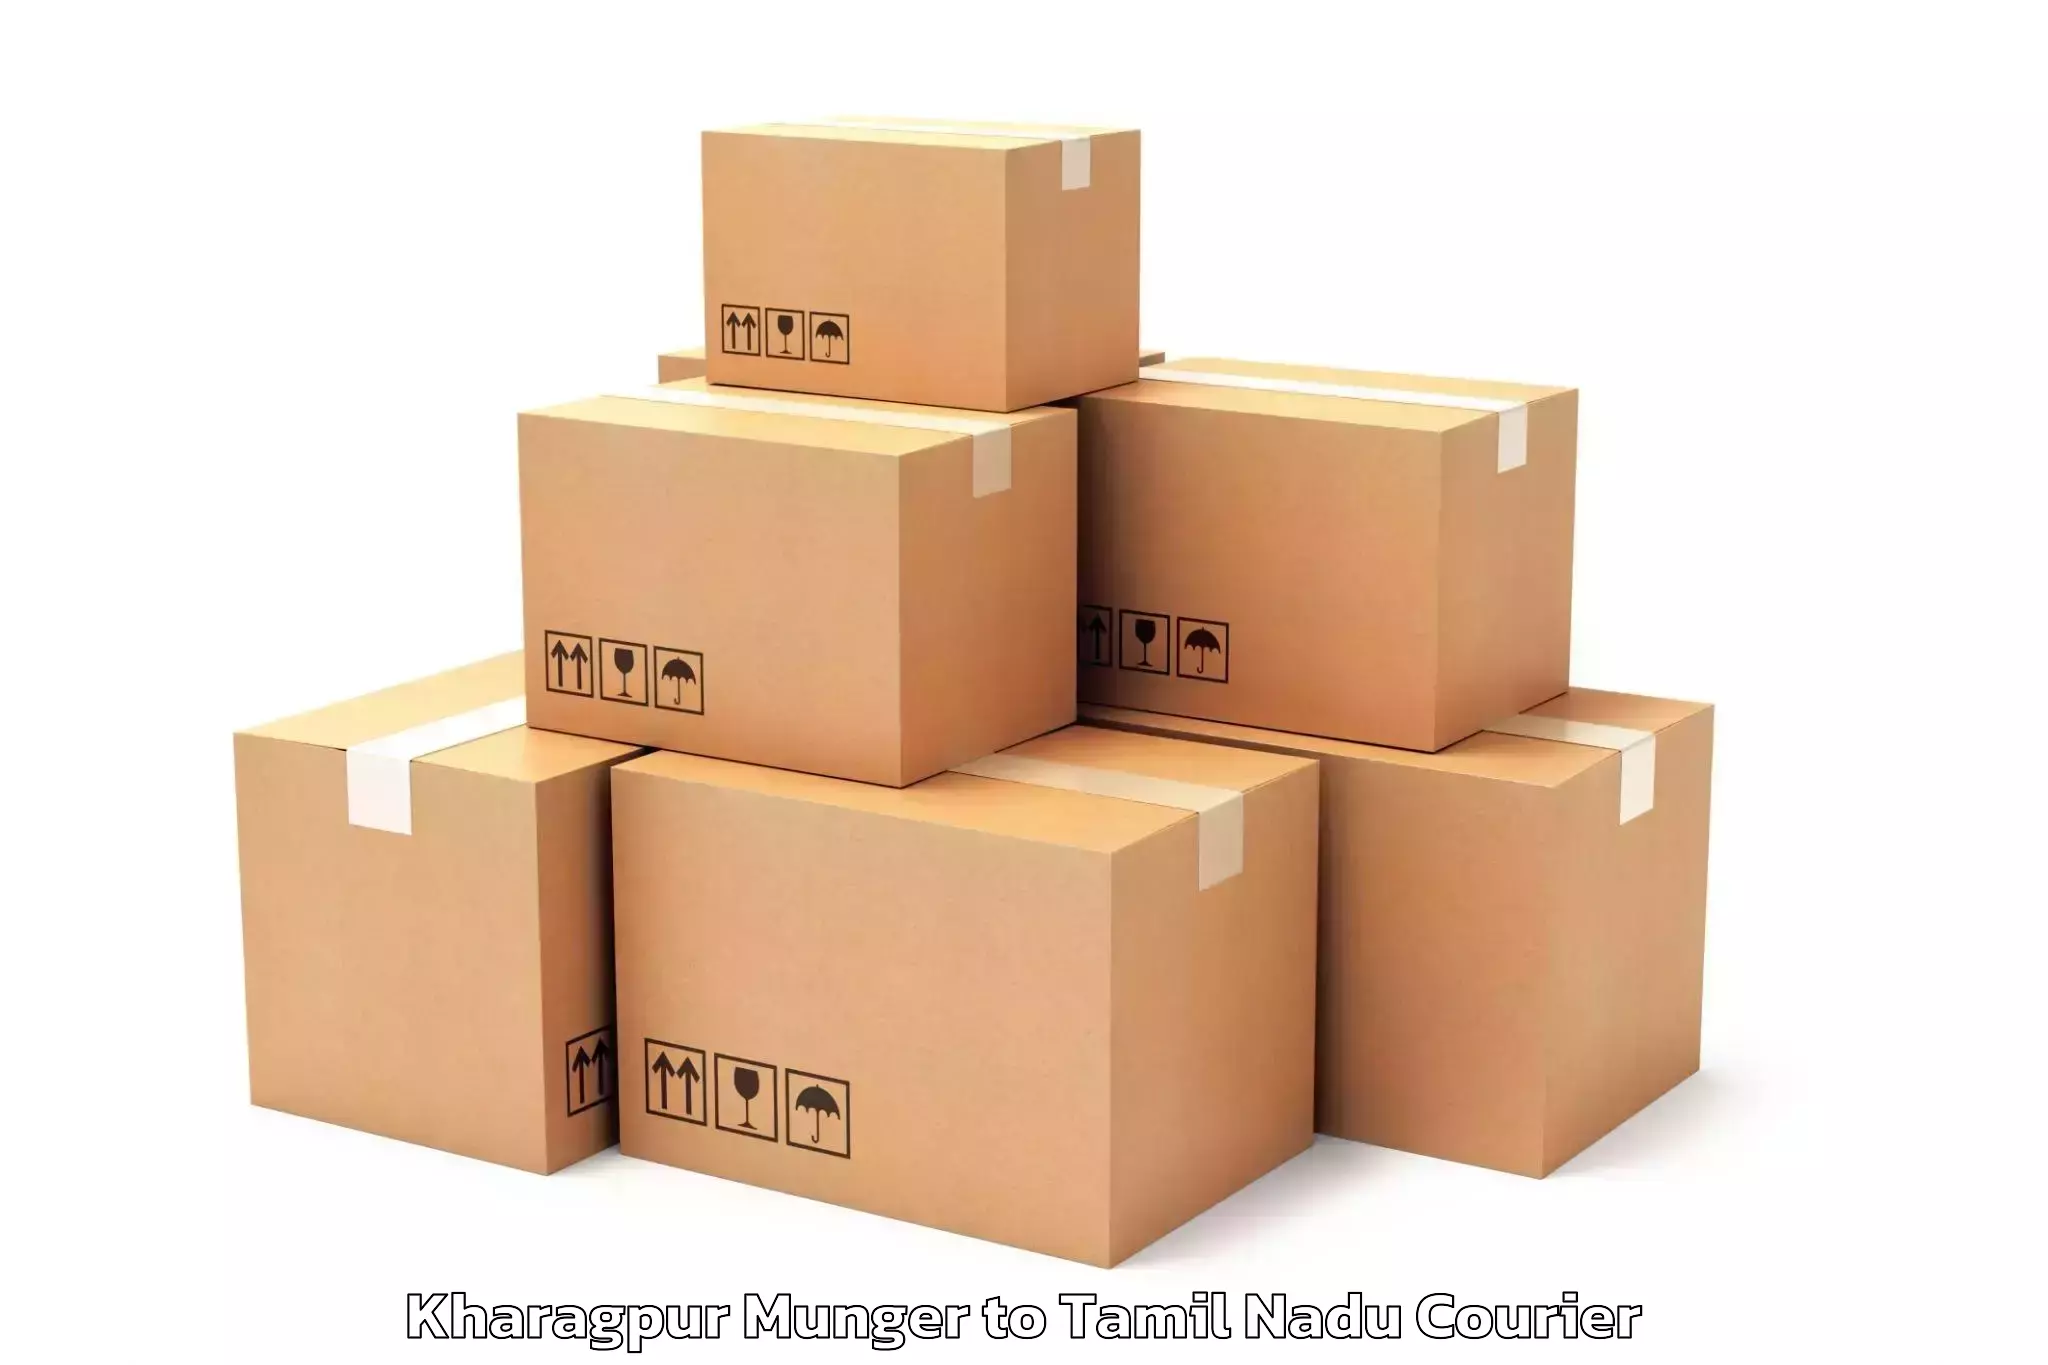 Professional packing services Kharagpur Munger to Ennore Port Chennai